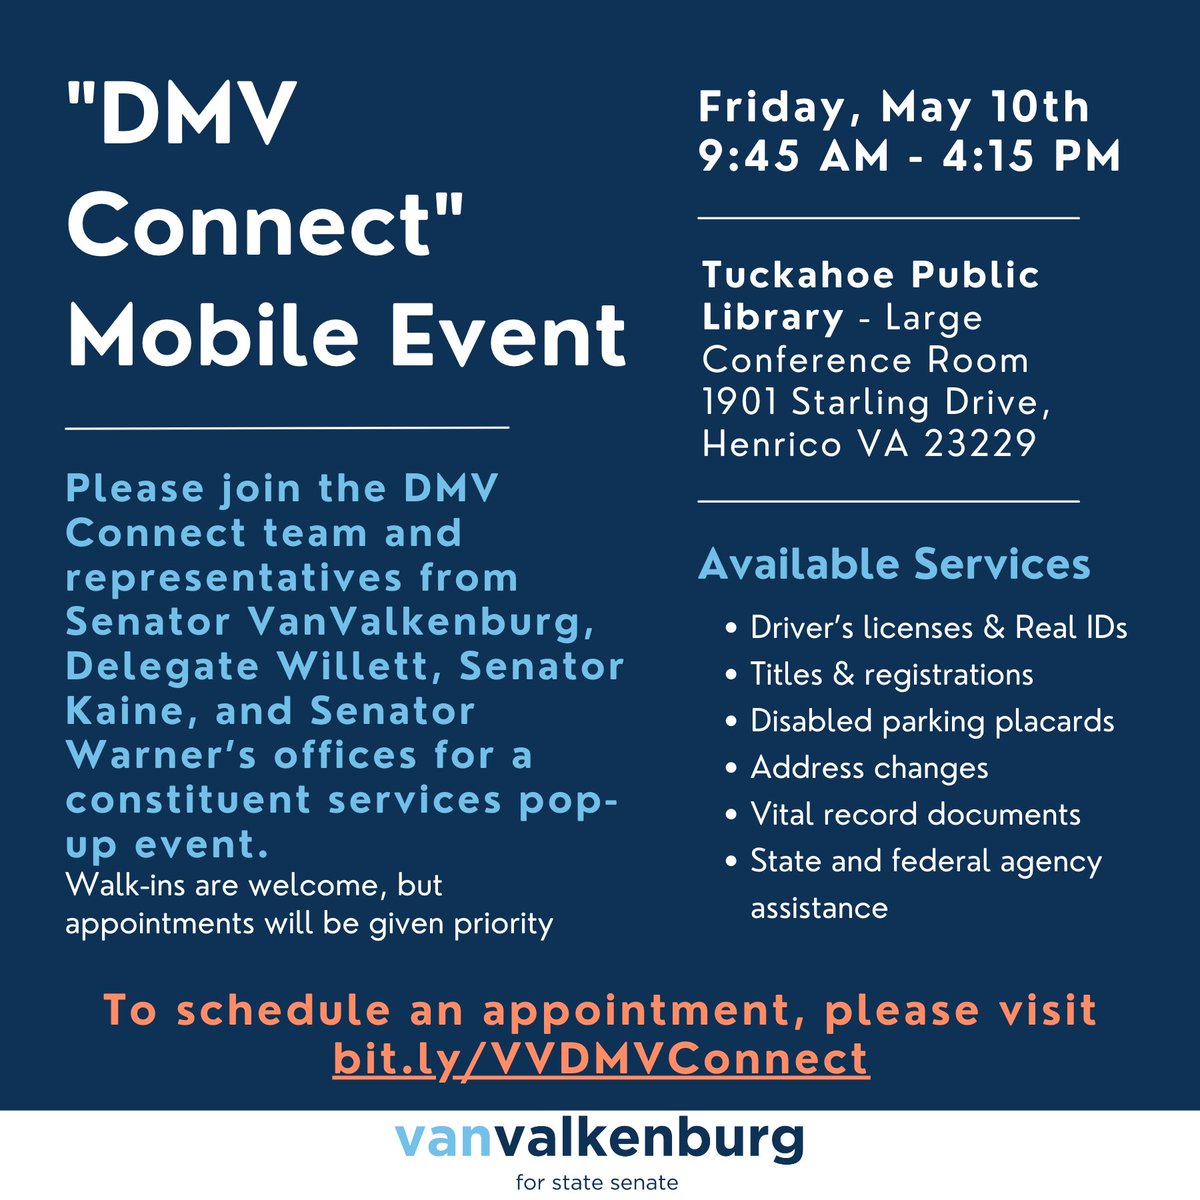 You can get a Real ID at our @VirginiaDMV constituent event on Friday.